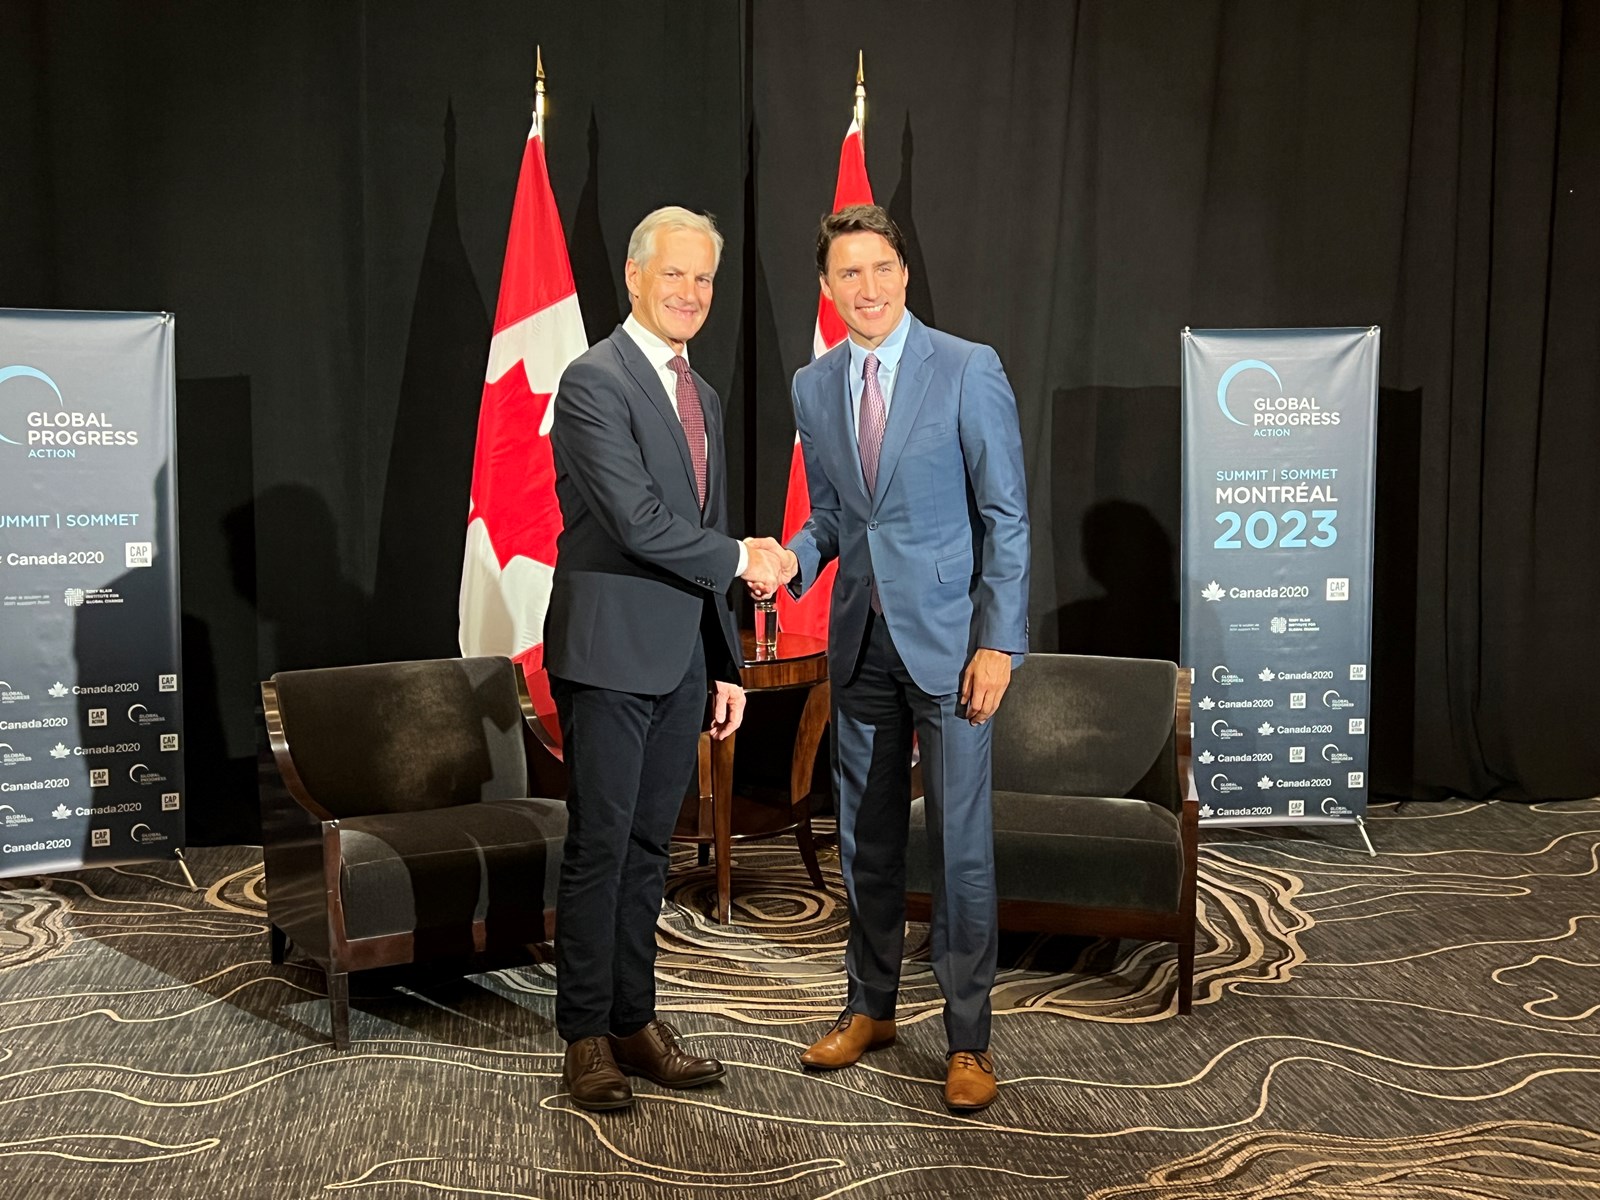 Meeting between the Prime Ministers of Norway and Canada